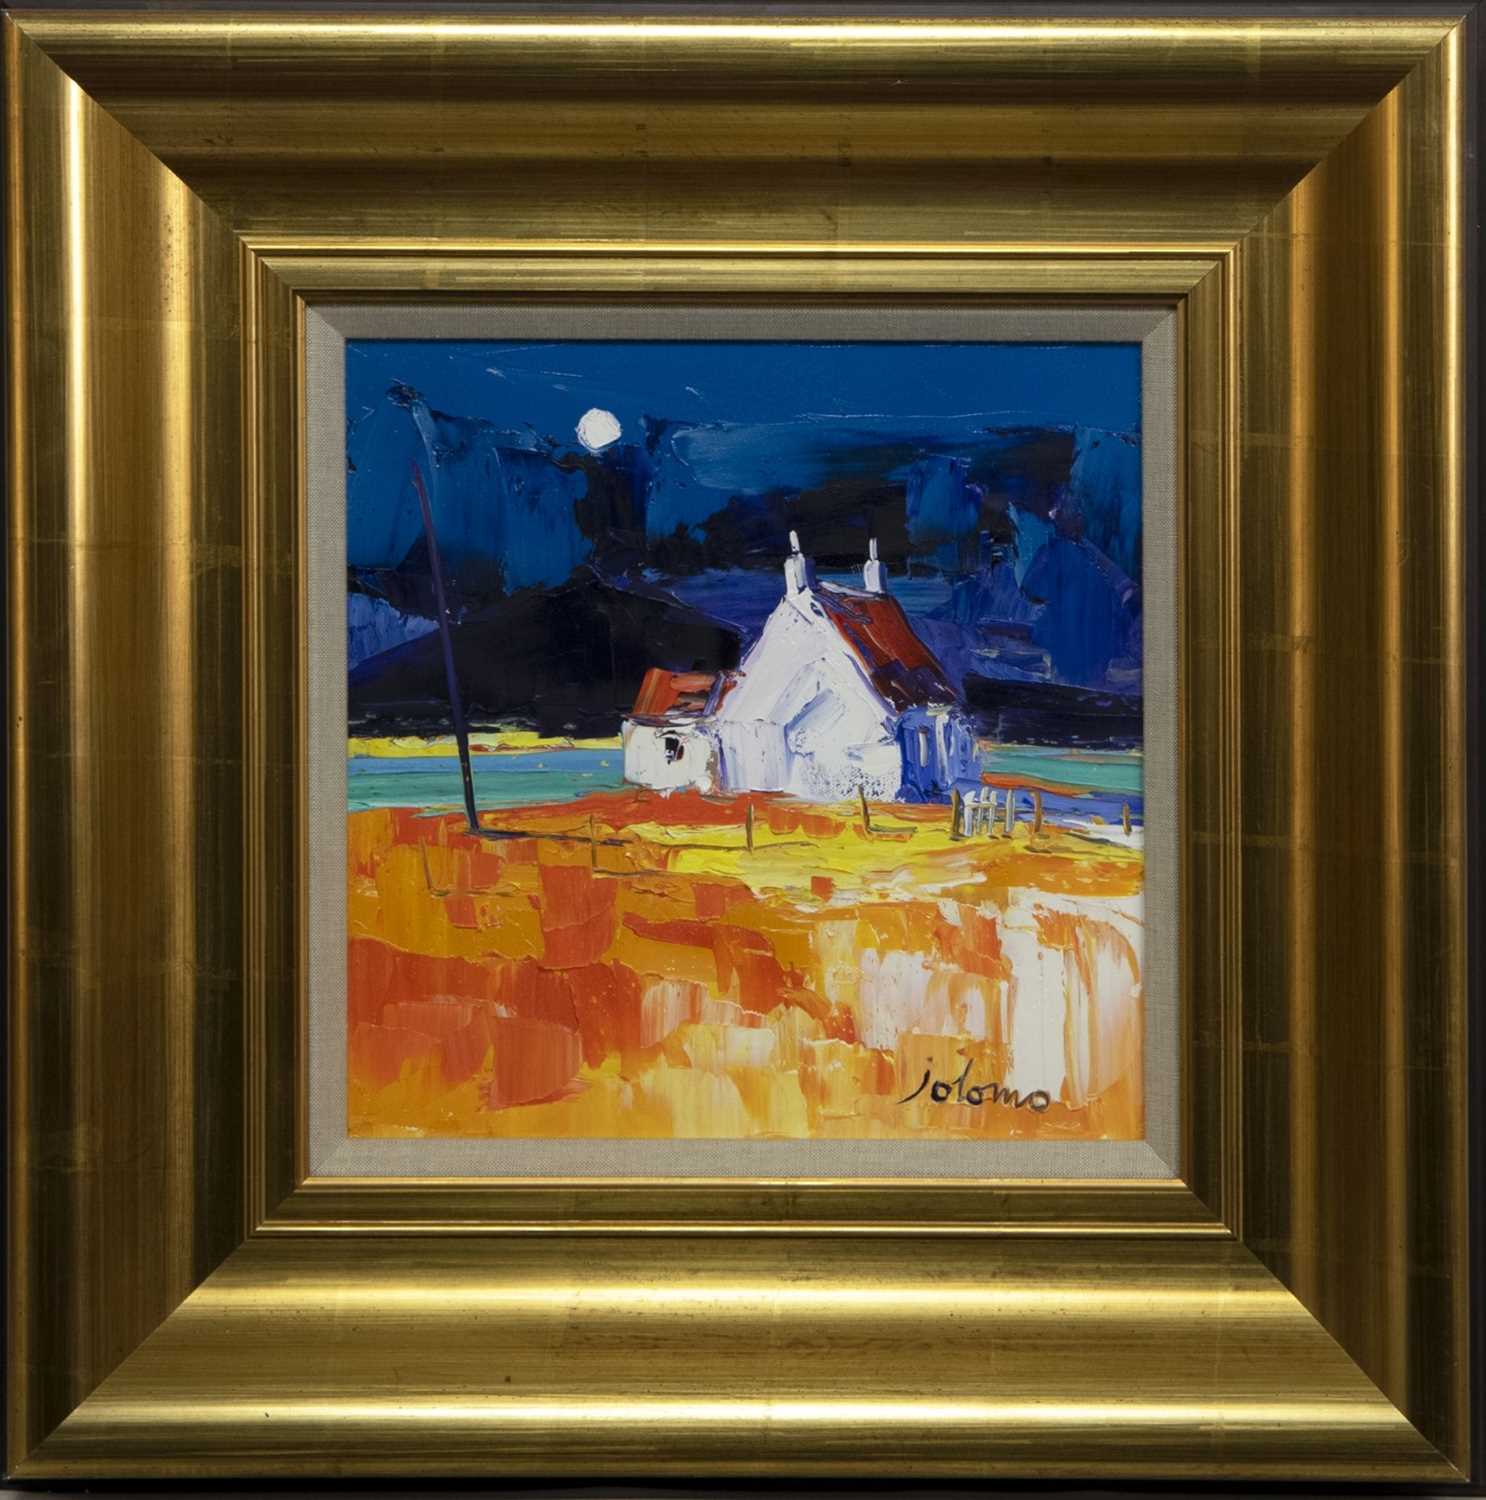 Lot 591 - MOON OVER CNOC-CUIL PHAIL, IONA, AN OIL BY JOLOMO